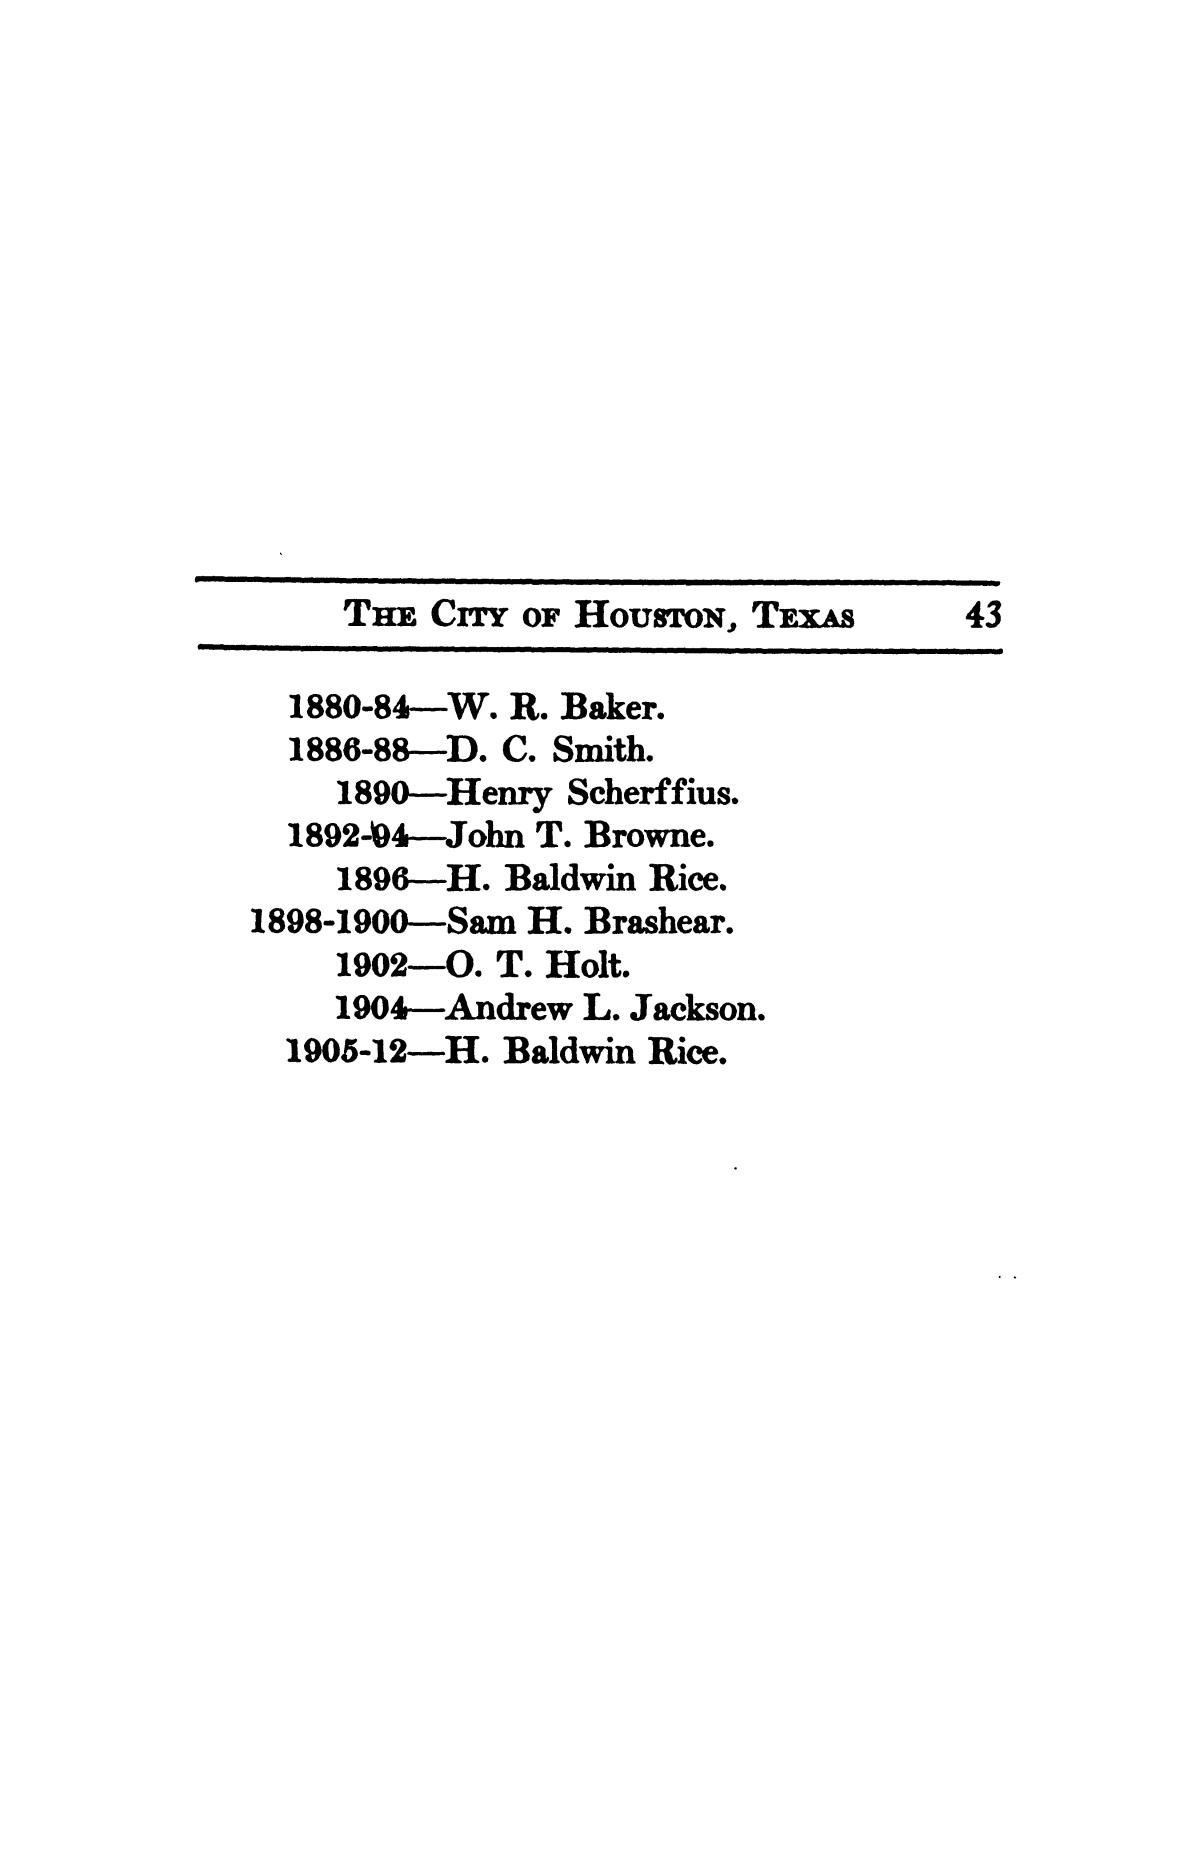 A thumb-nail history of the city of Houston, Texas, from its founding in 1836 to the year 1912
                                                
                                                    43
                                                